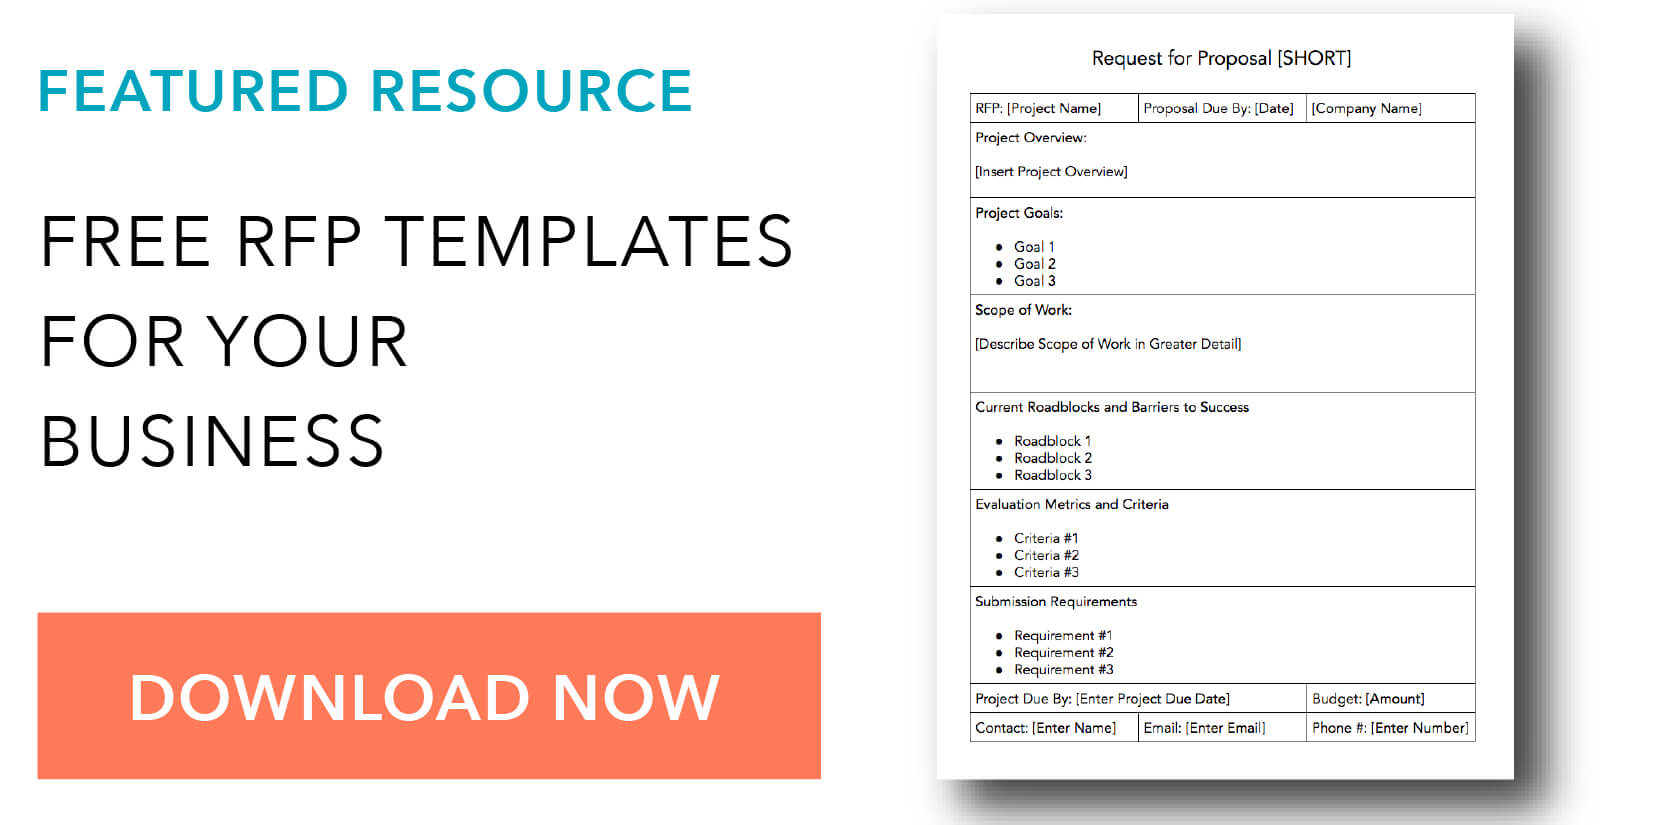 How To Write A Request For Proposal, With Template And Sample In Post Event Evaluation Report Template